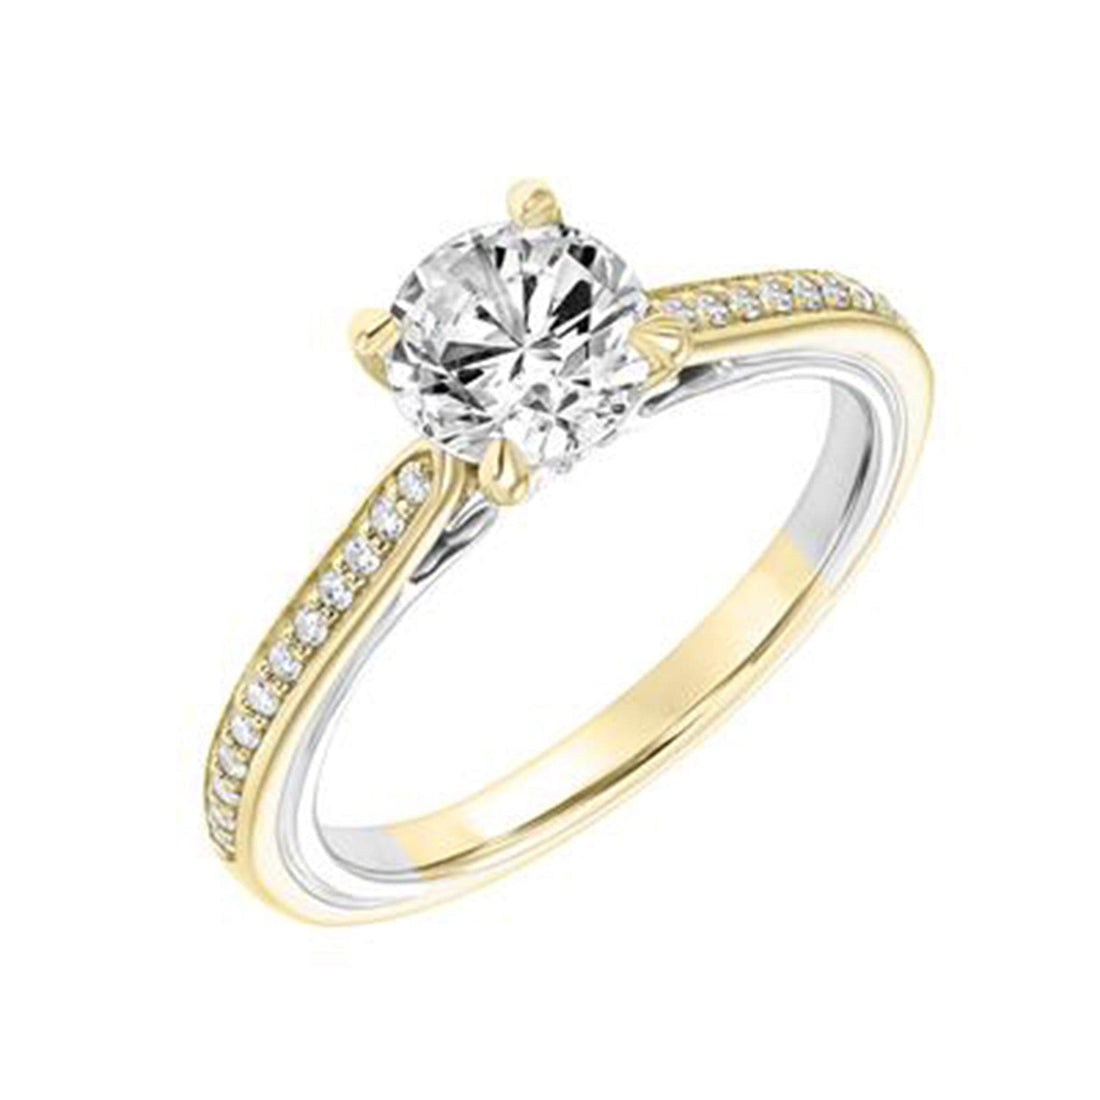 Round Diamond Two-Tone Gold Engagement Ring by Frederick Goldman